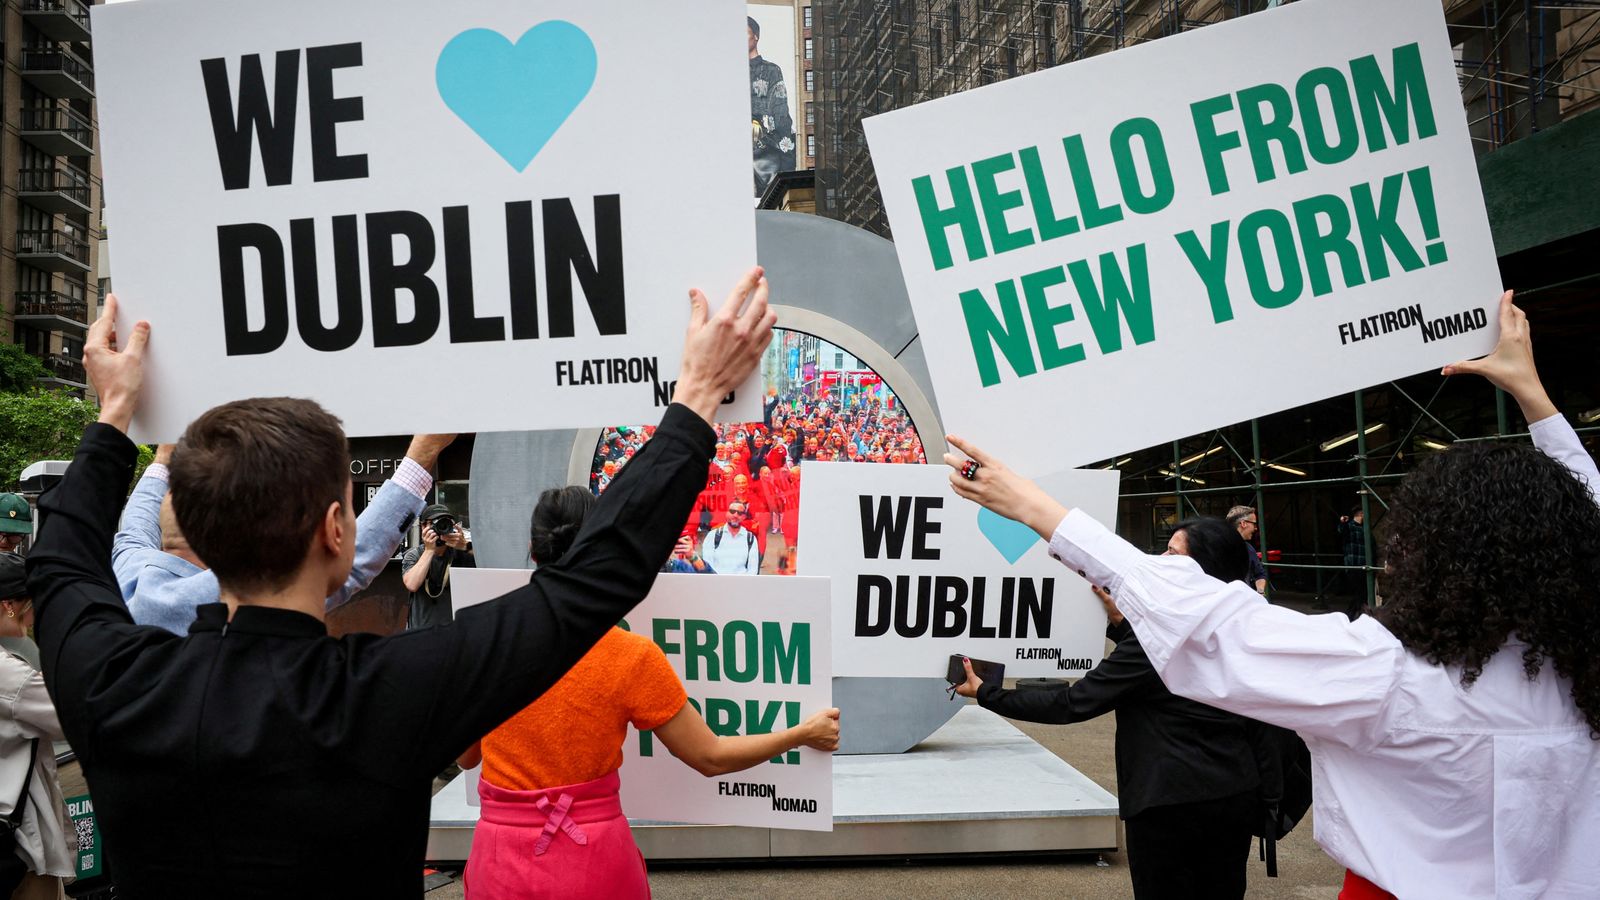 Portal connecting Dublin and New York ‘reawakens’ under new restrictions after ‘inappropriate behaviour’ | World News – The TechLead